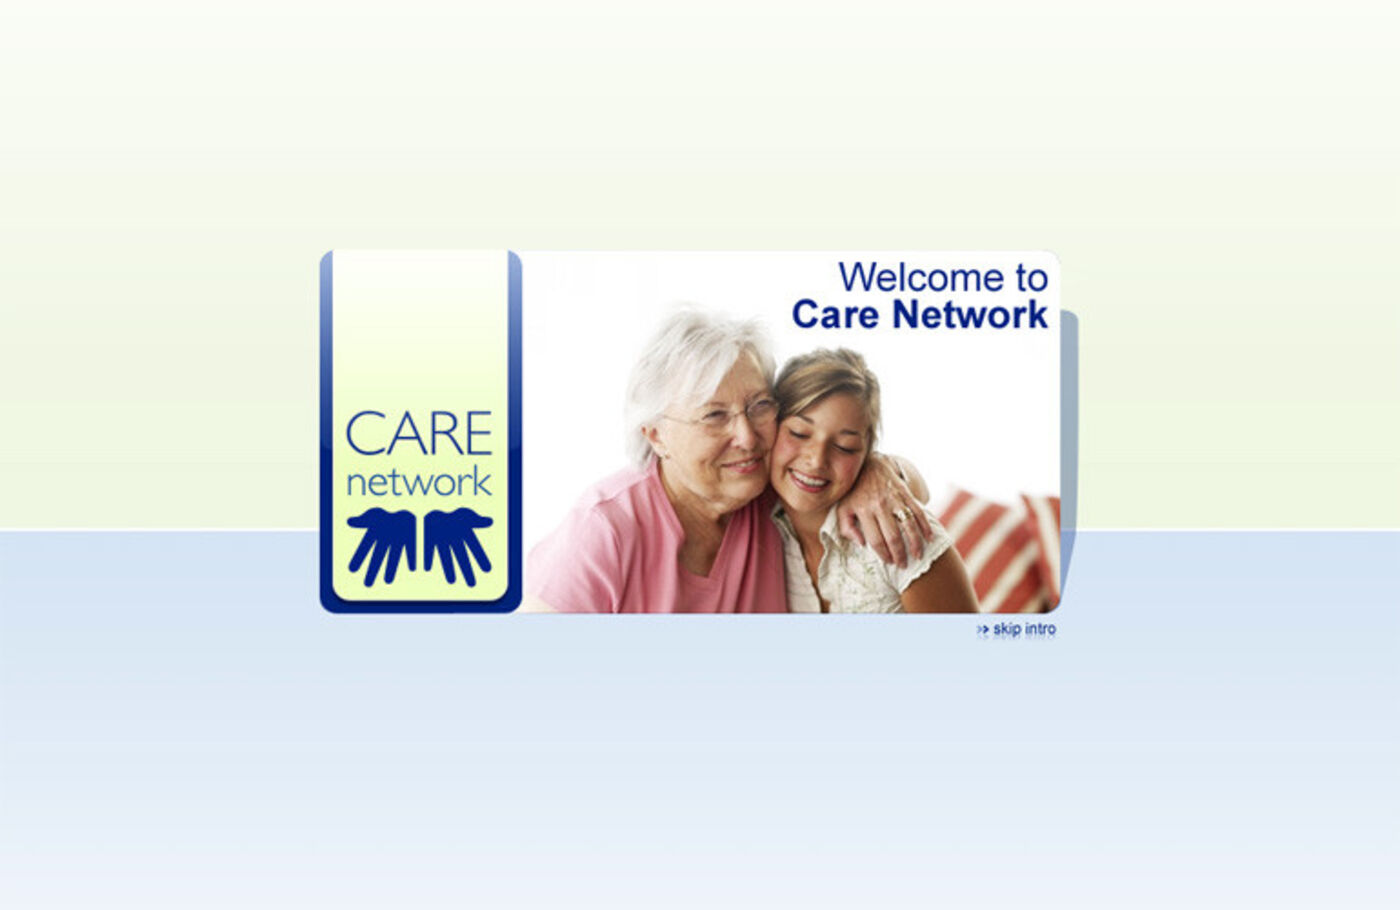 Care Network Welcome